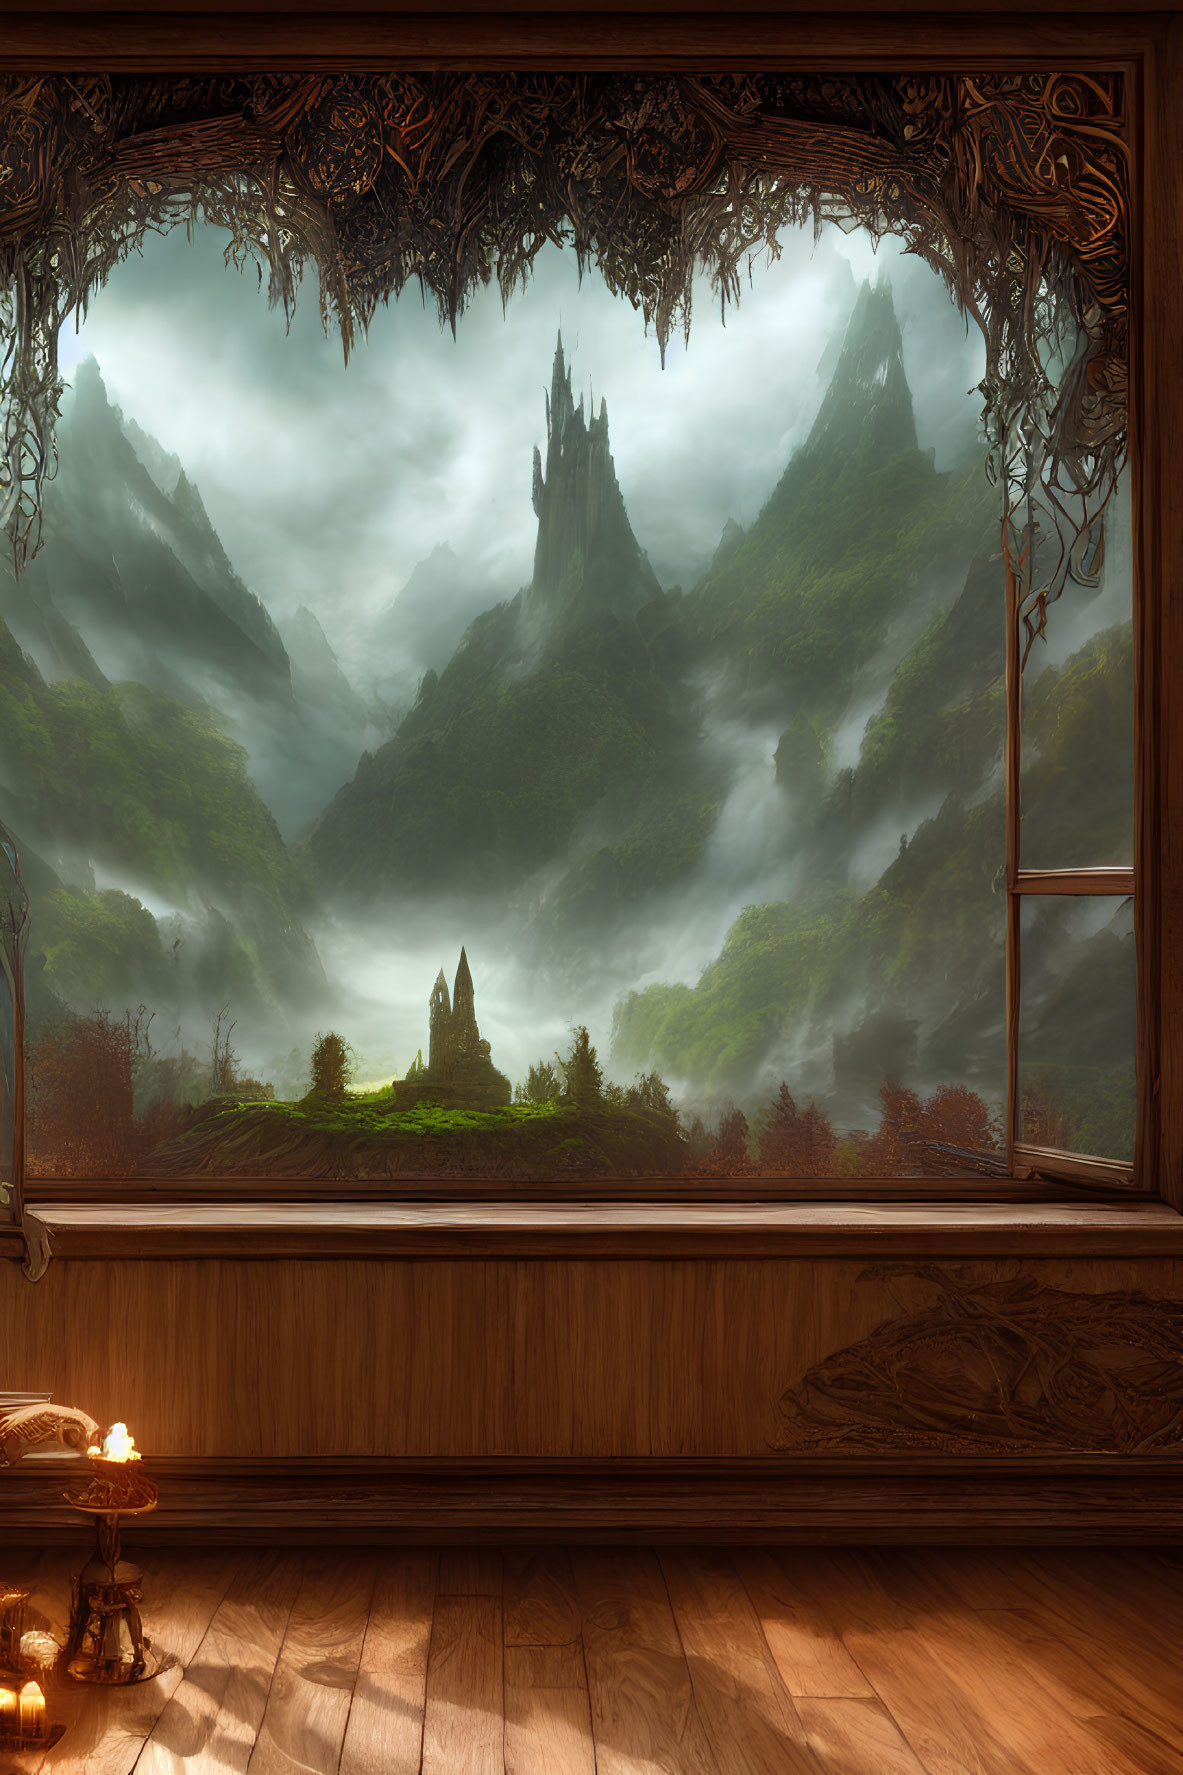 Fantasy landscape with misty mountains, castle, and candles